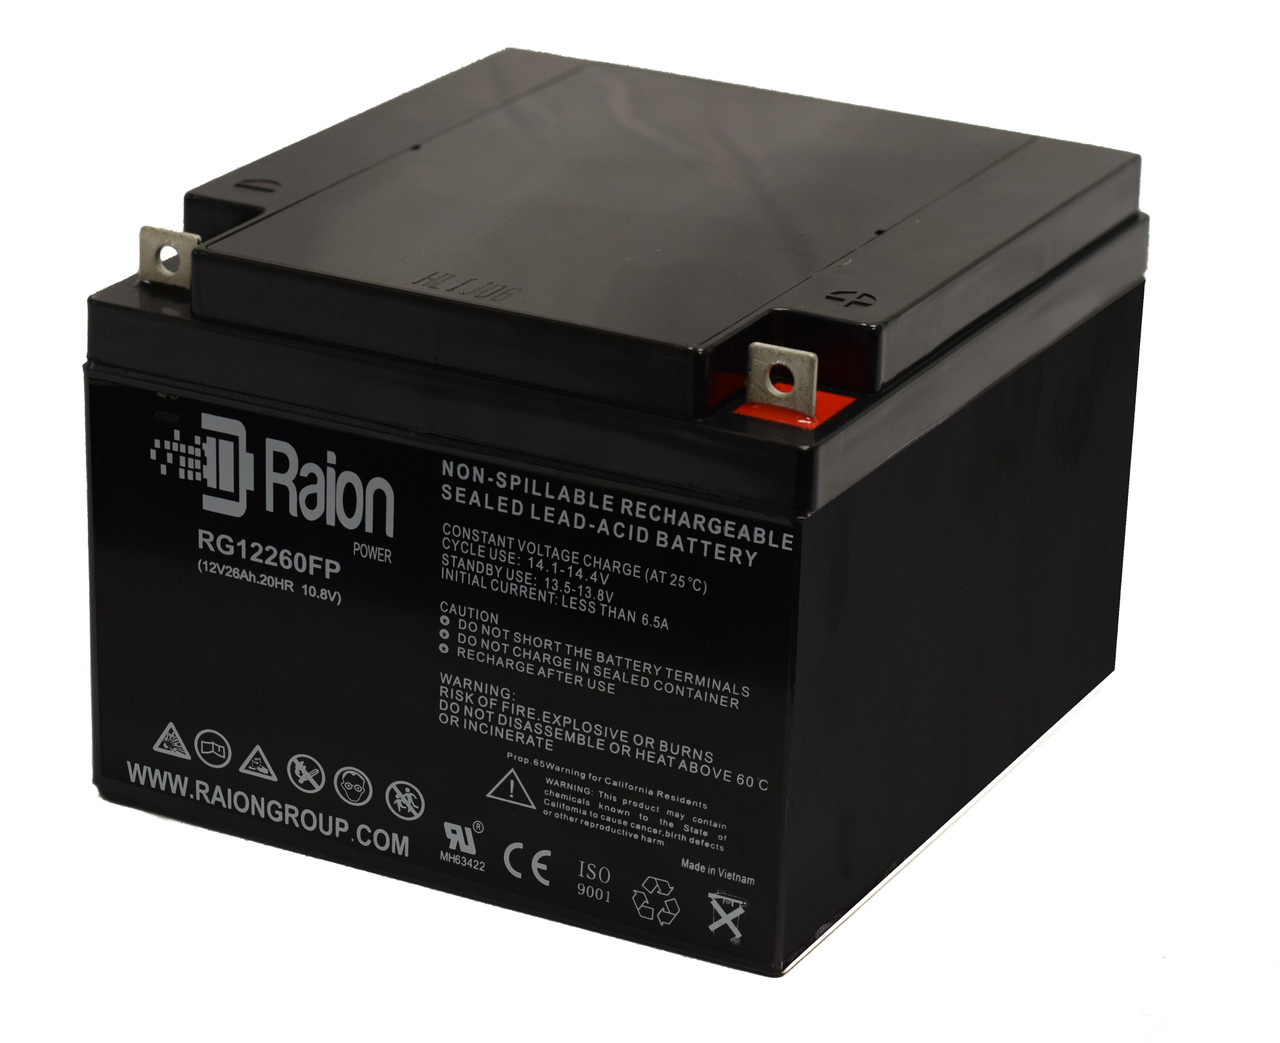 Raion Power Replacement 12V 26Ah Battery for Marquette 2330N Neonatal Monitor - 1 Pack